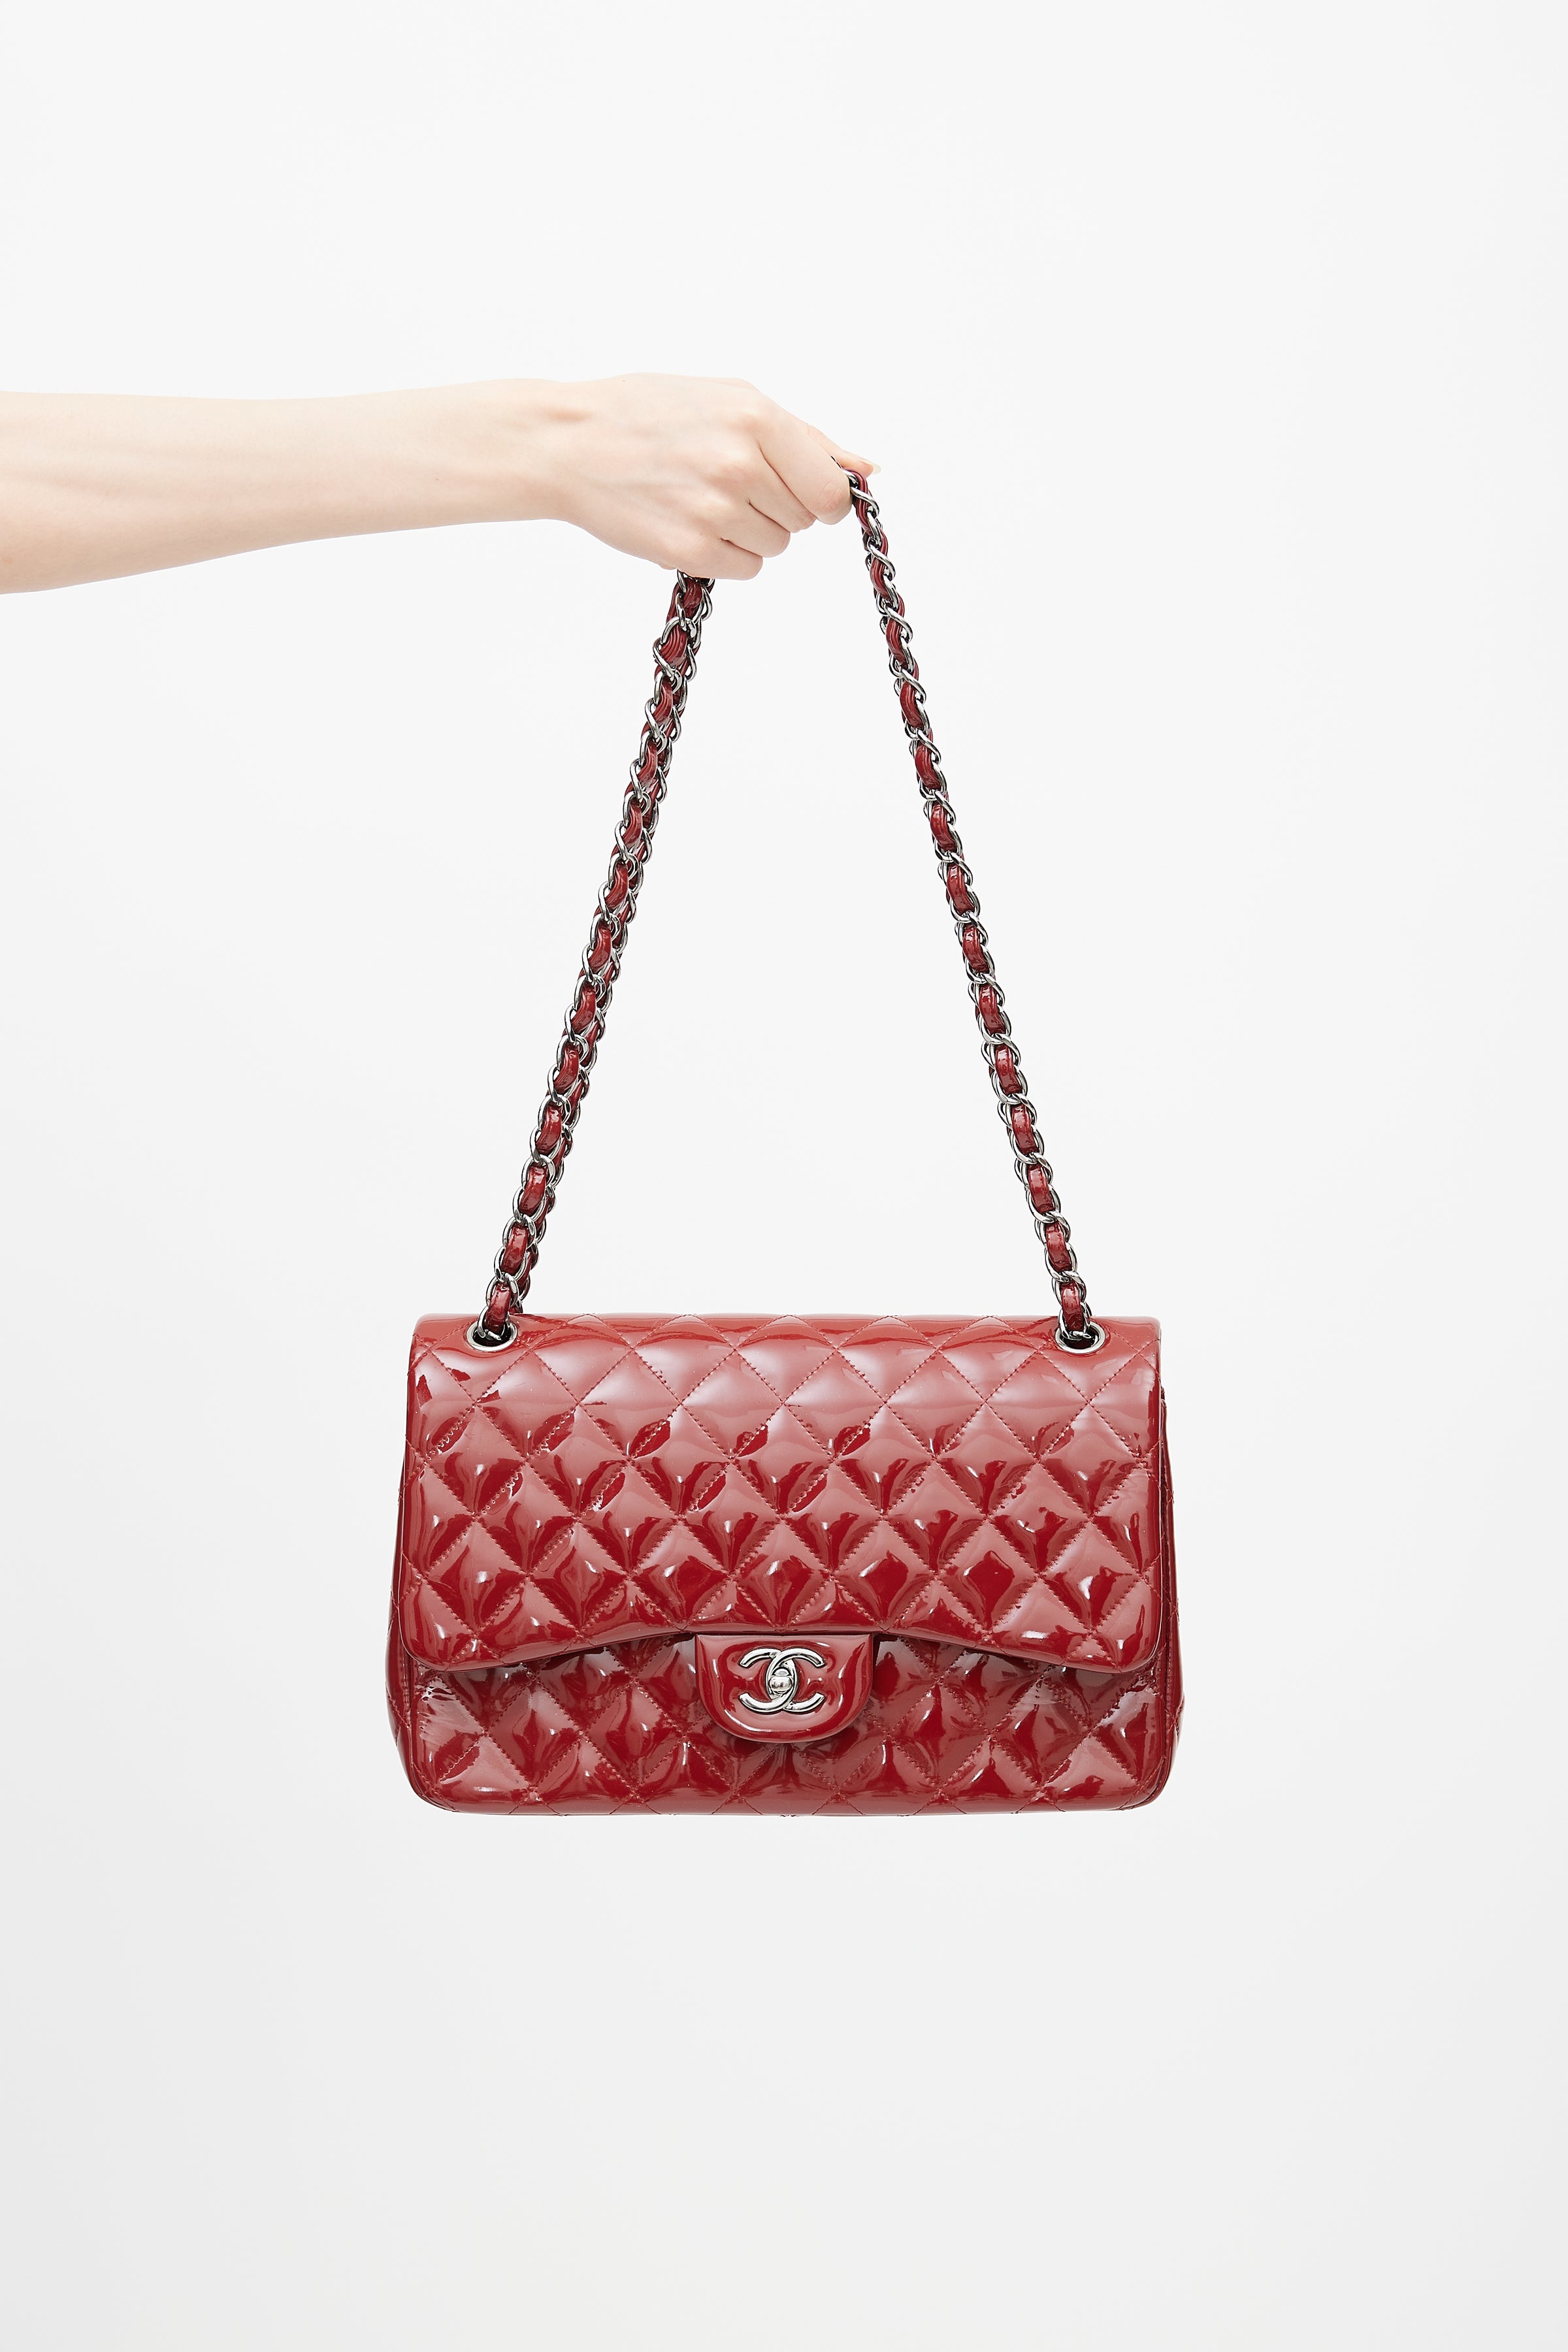 red and white chanel bag new